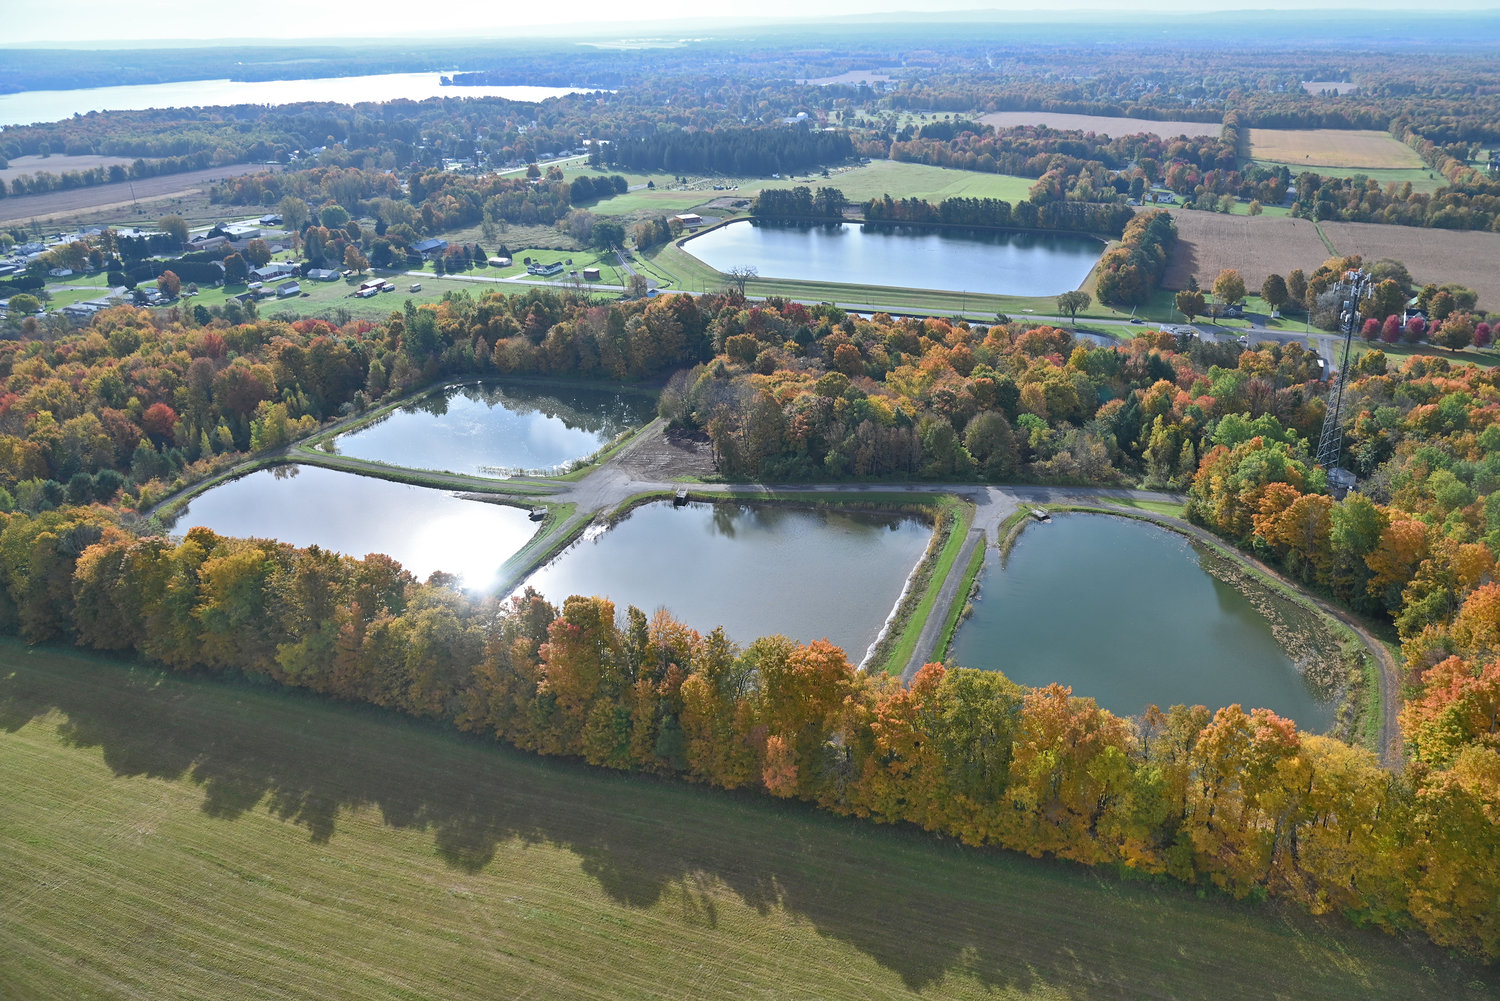 Reservoirs in the town of Lee that supply water for the City of Rome’s water system are shown in this aerial photo. Rome Lee Center-Taberg Road splits the main pools, with one pool mostly obscured by the foliage. Behind the two pools which can be seen from the road are four additional pools, not visible from the roadway.